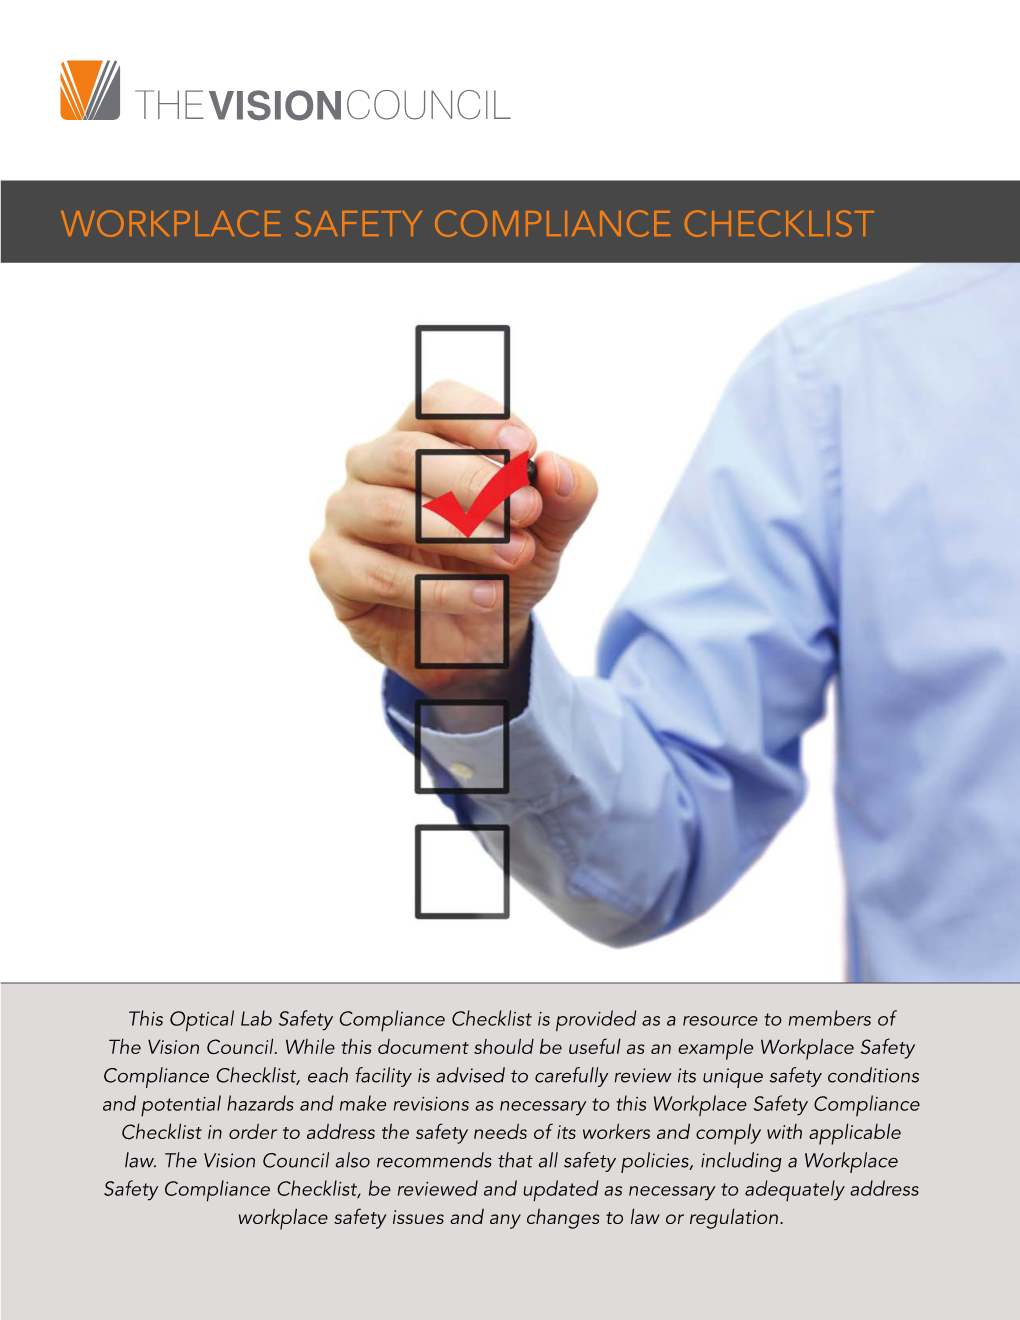 This Optical Lab Safety Compliance Checklist Is Provided As a Resource